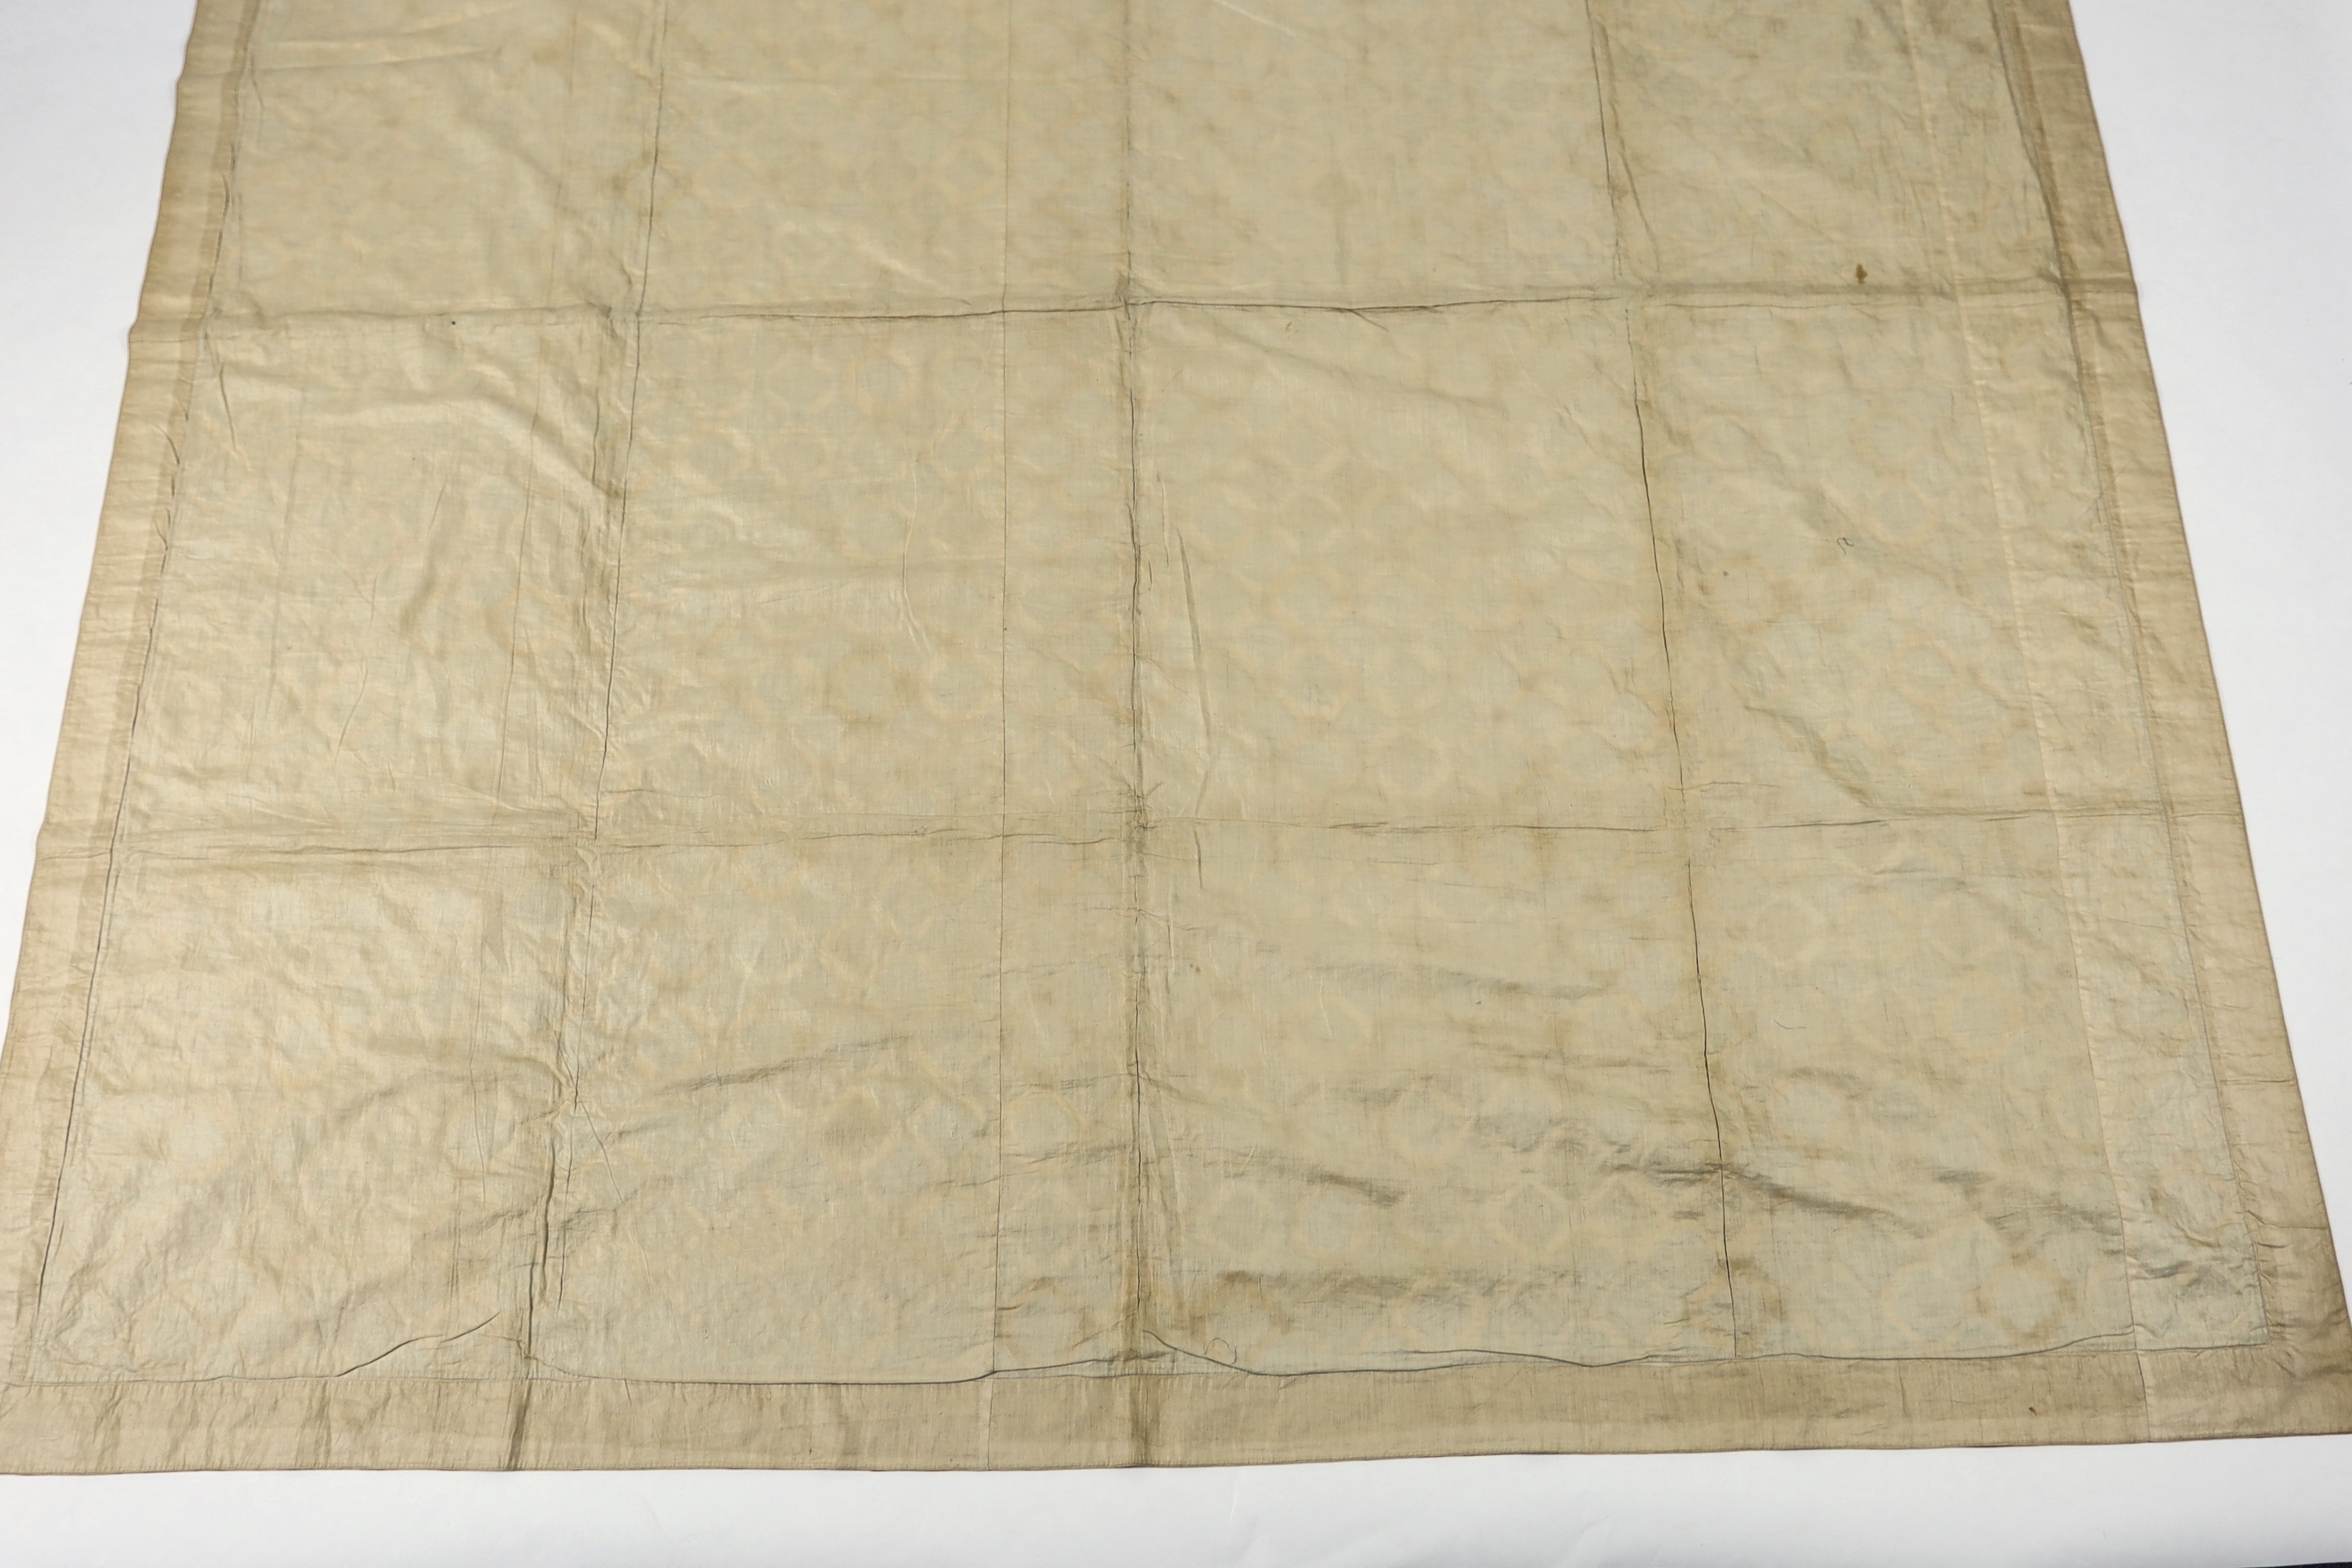 A handsome 19th century silk patch worked quilt, worked in repeating octagon shapes, in a large selection of 19th century printed and woven brocaded silks on a black and brown velvet background, edged with a 19th century